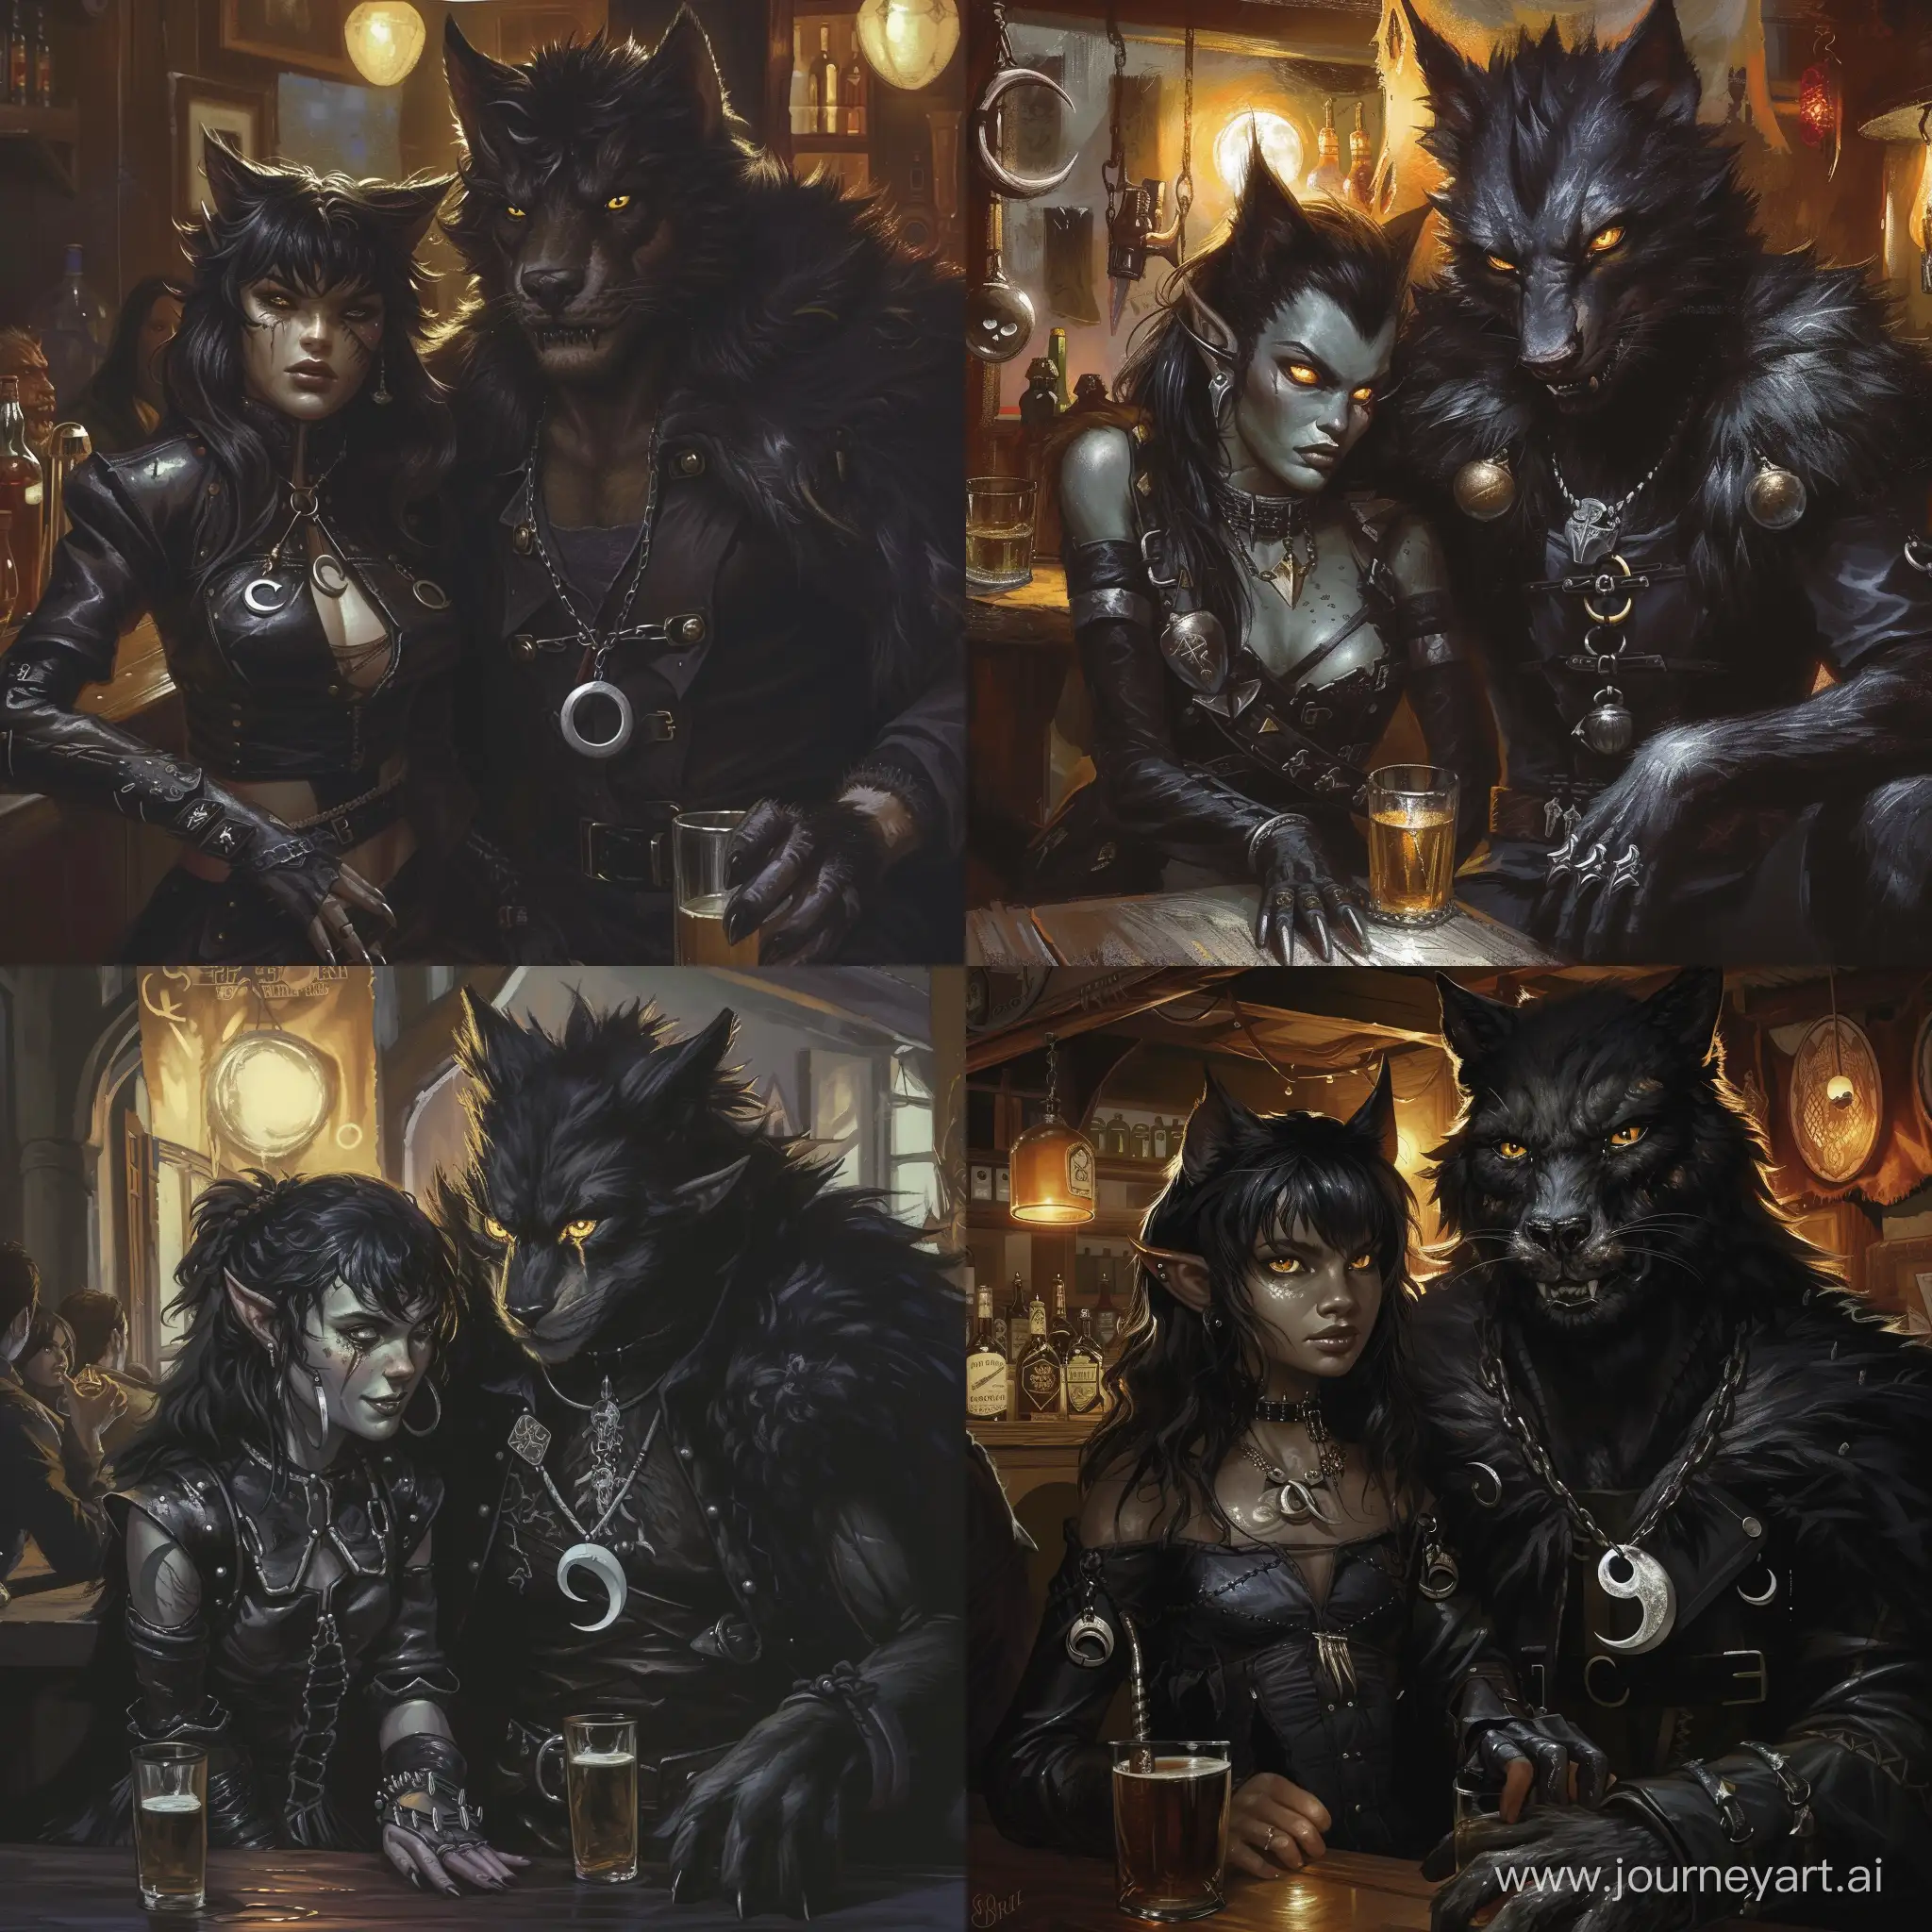 A rogueish humanoid girl werecat with sleek black fur and glowing golden eyes, Nimble and lithe, with retractable claws and a tail that twitches with anticipation, Cloaked in dark leathers, with silver moon-shaped pendants adorning a collar around his neck, accompanied by a lycanthropic man warrior with a ferocious and untamed presence, Feral golden eyes that burn with primal instincts and a mane of wild, dark hair, Cloaked in a shapeshifter's pelt, drinking in a tavern, 1970's dark fantasy style, grim dark, gritty, detailed